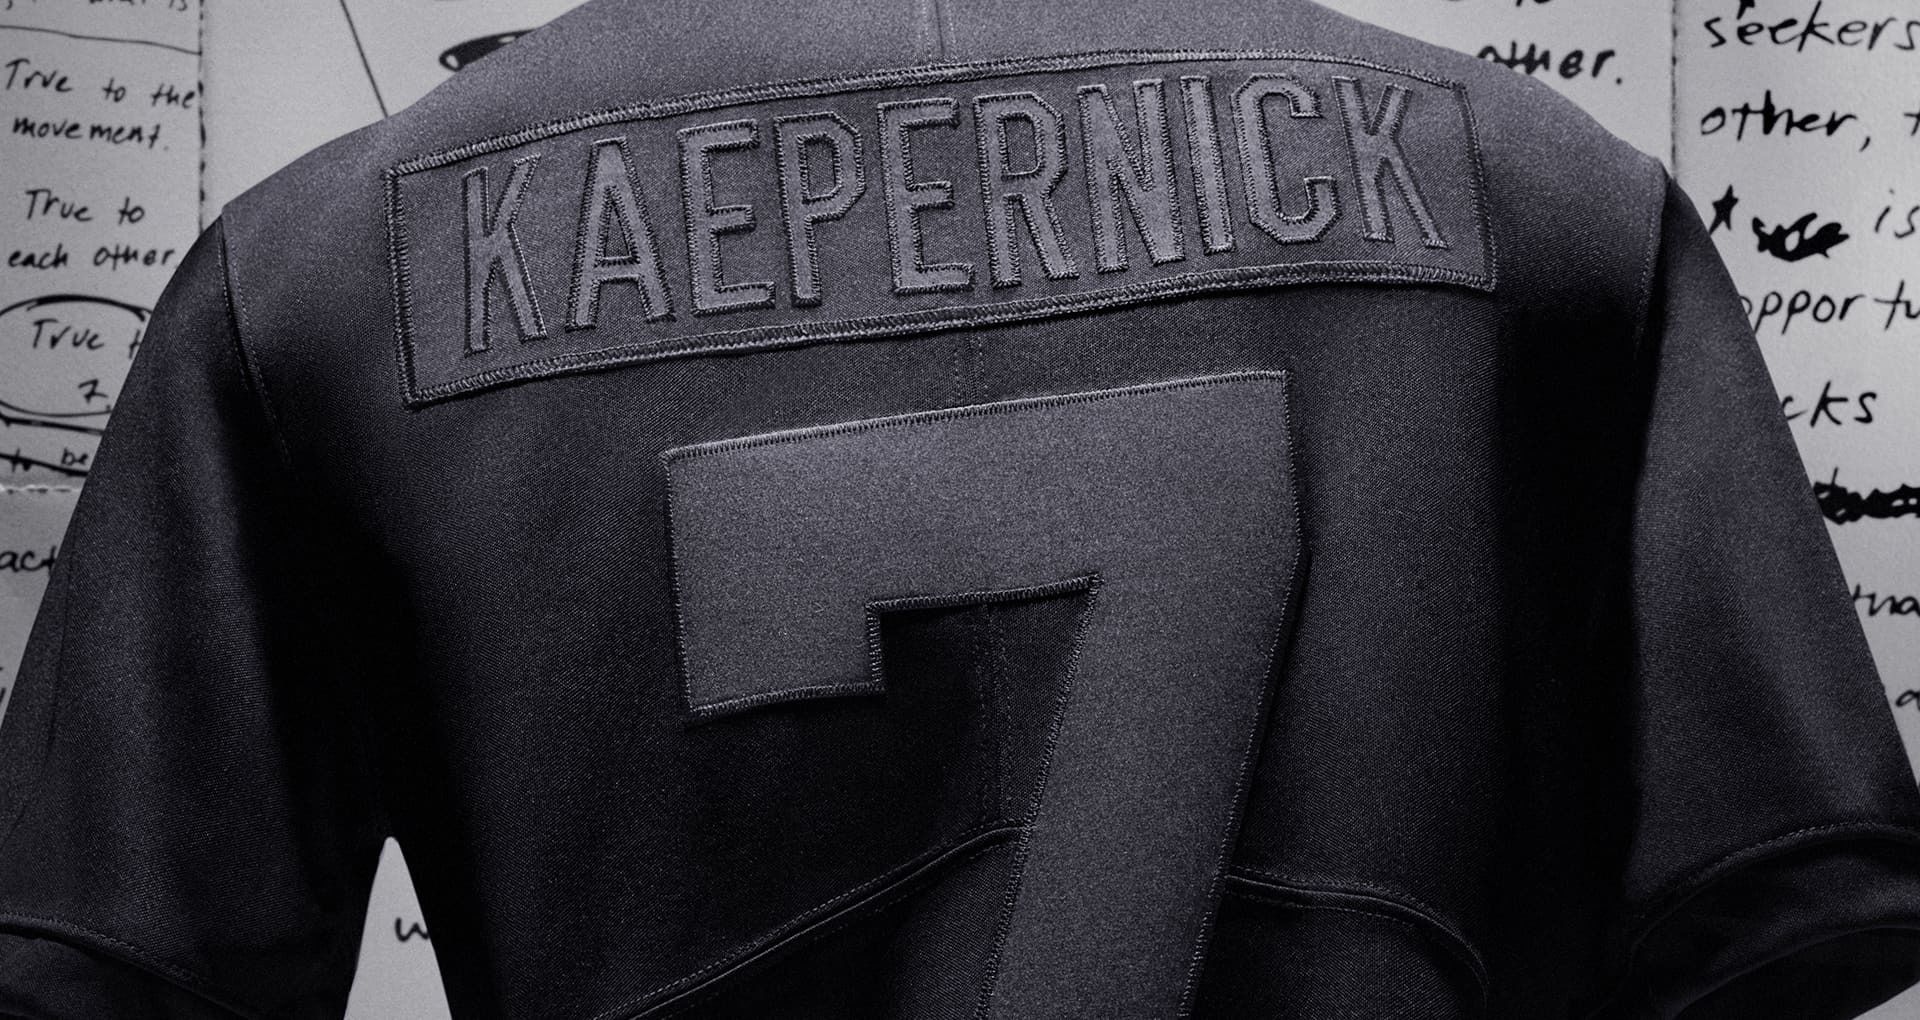 Vatio realimentación Cereal Nike's all-black Colin Kaepernick jersey marking 4 years since he took a  knee sells out in less than a minute | CNN